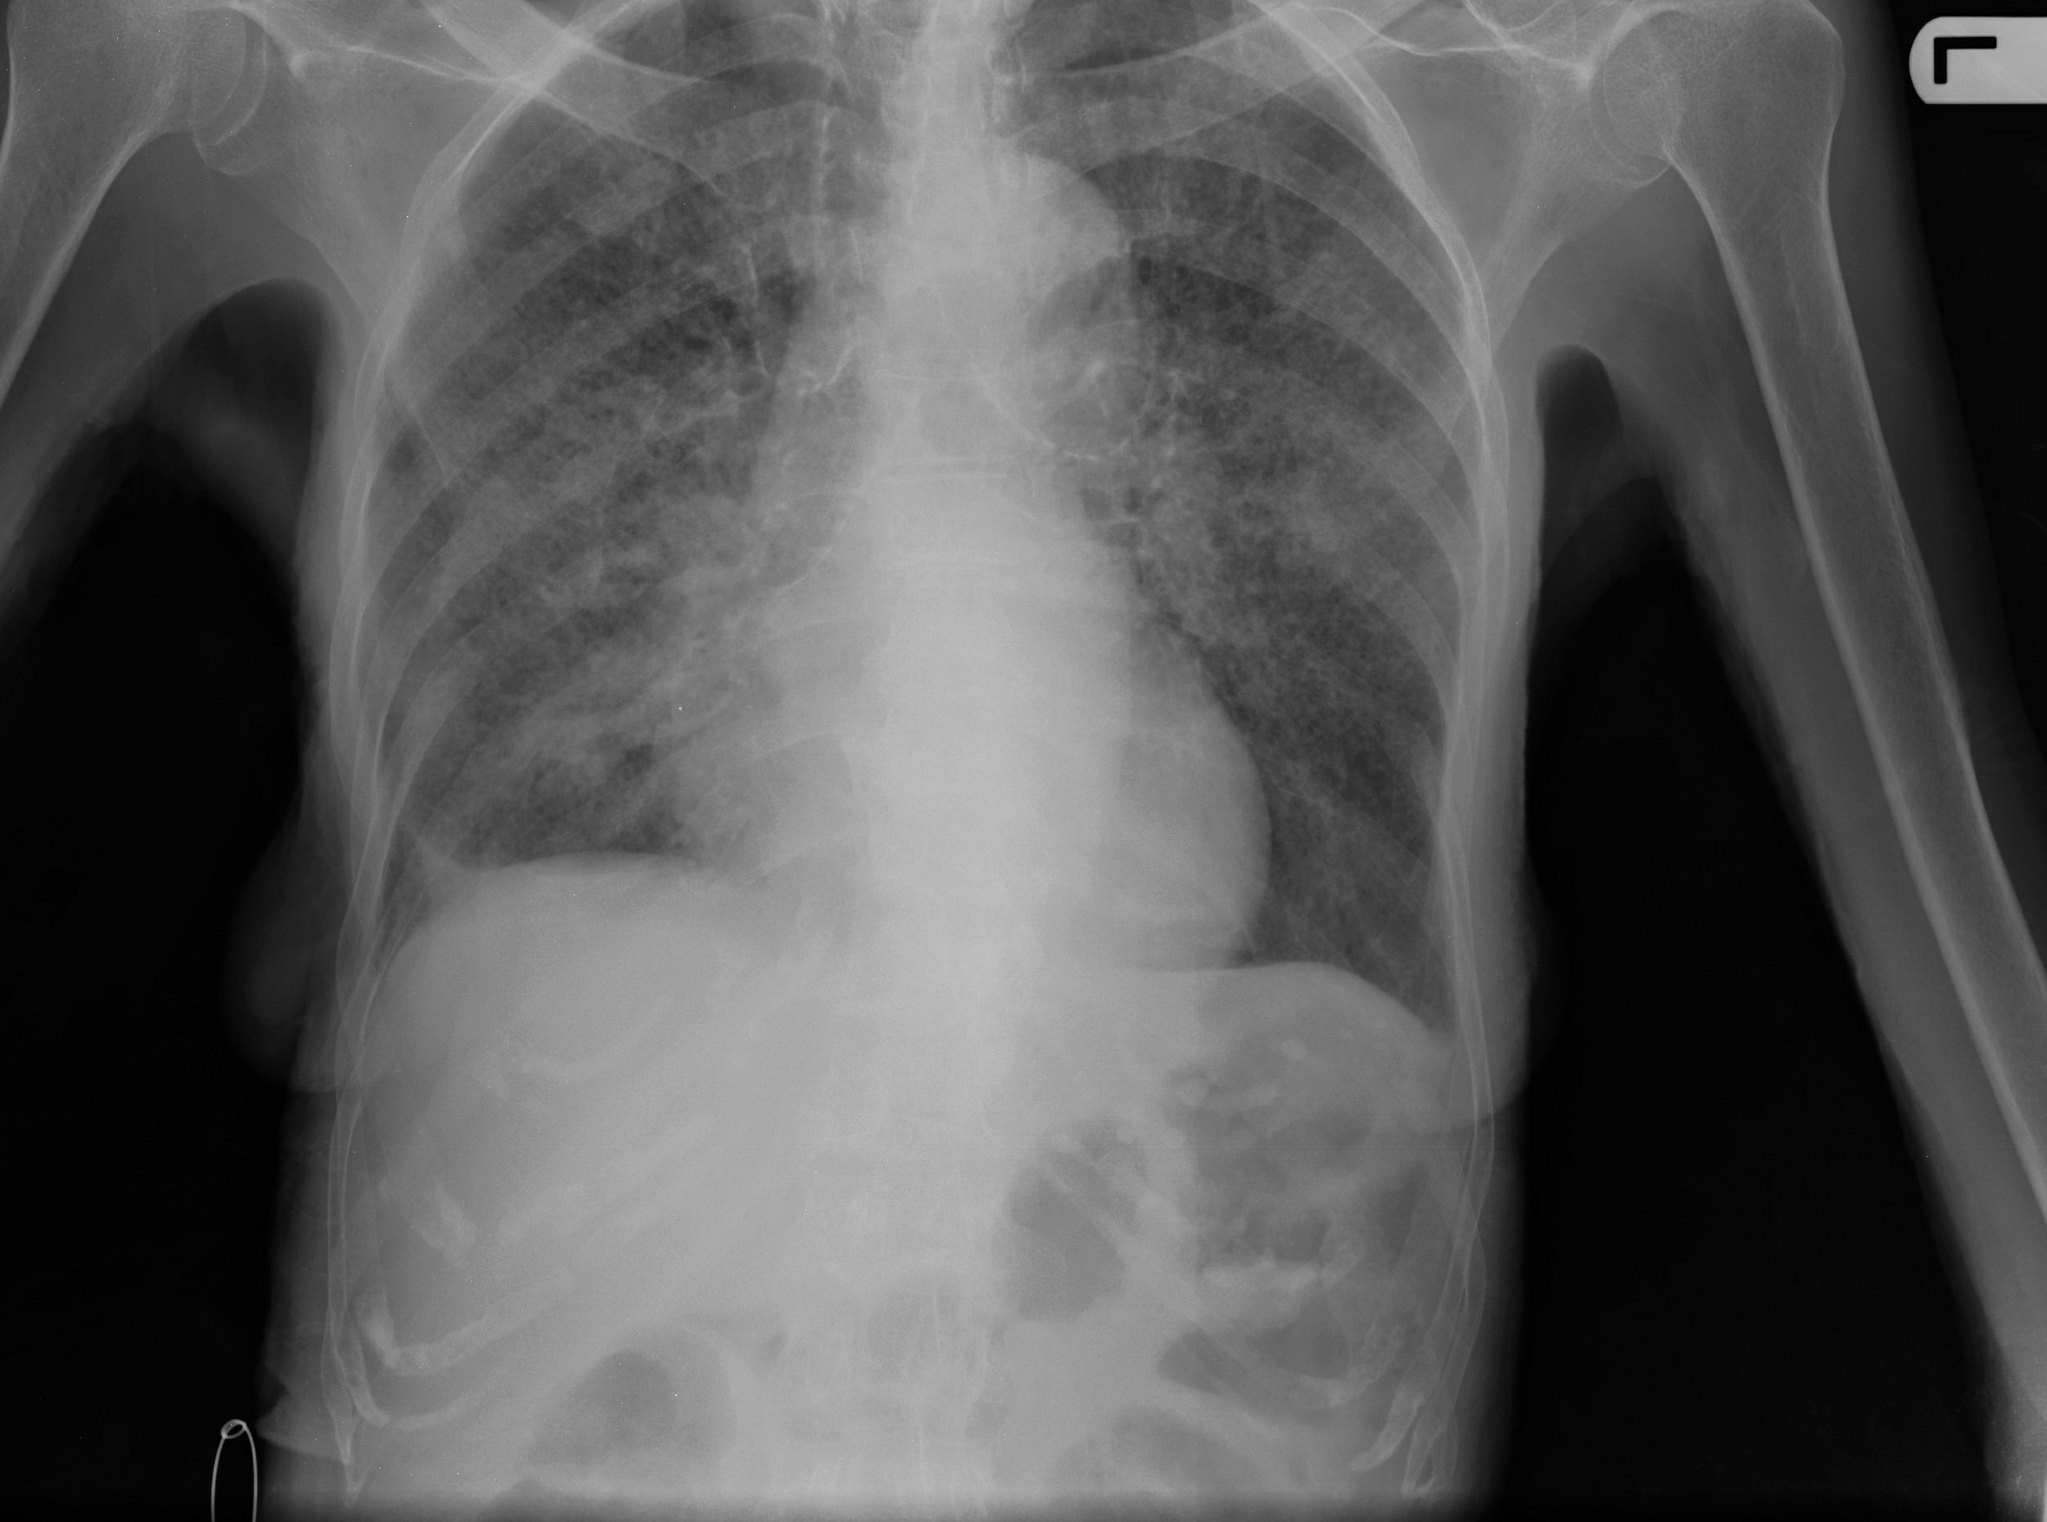 A chest X-ray showing lung damage caused by tuberculosis.